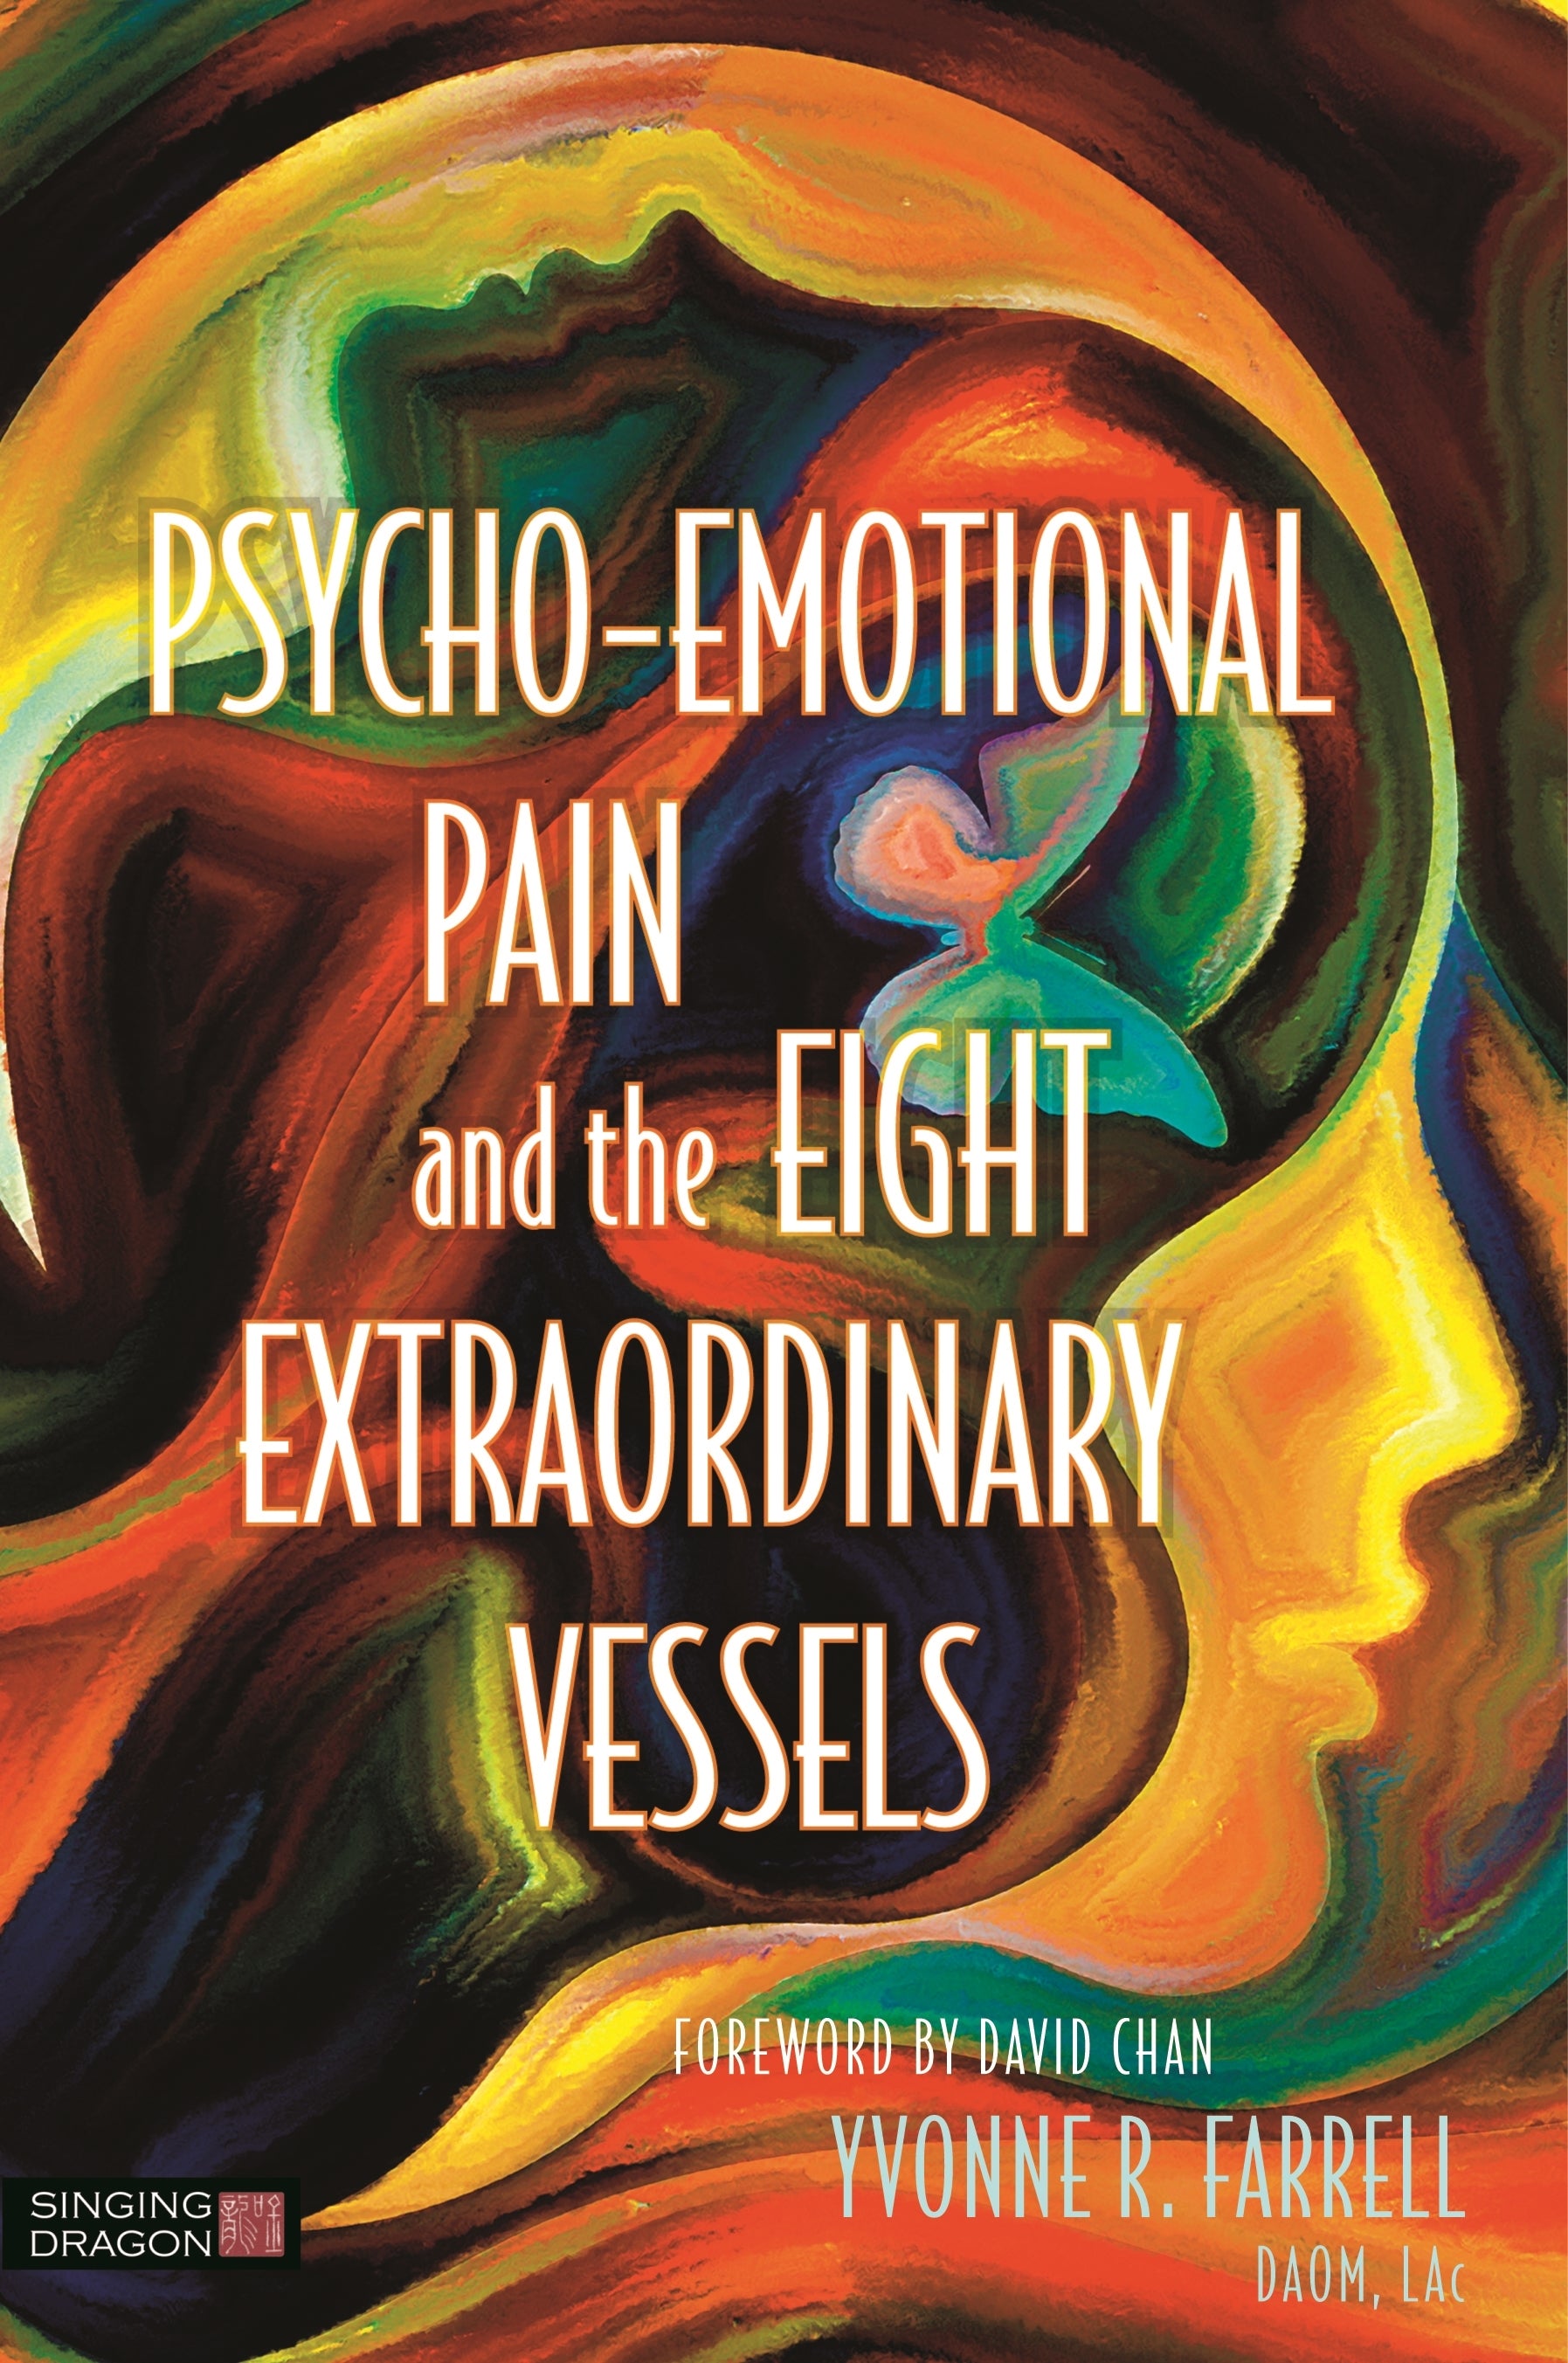 Psycho-Emotional Pain and the Eight Extraordinary Vessels by Yvonne R. Farrell, David Chan